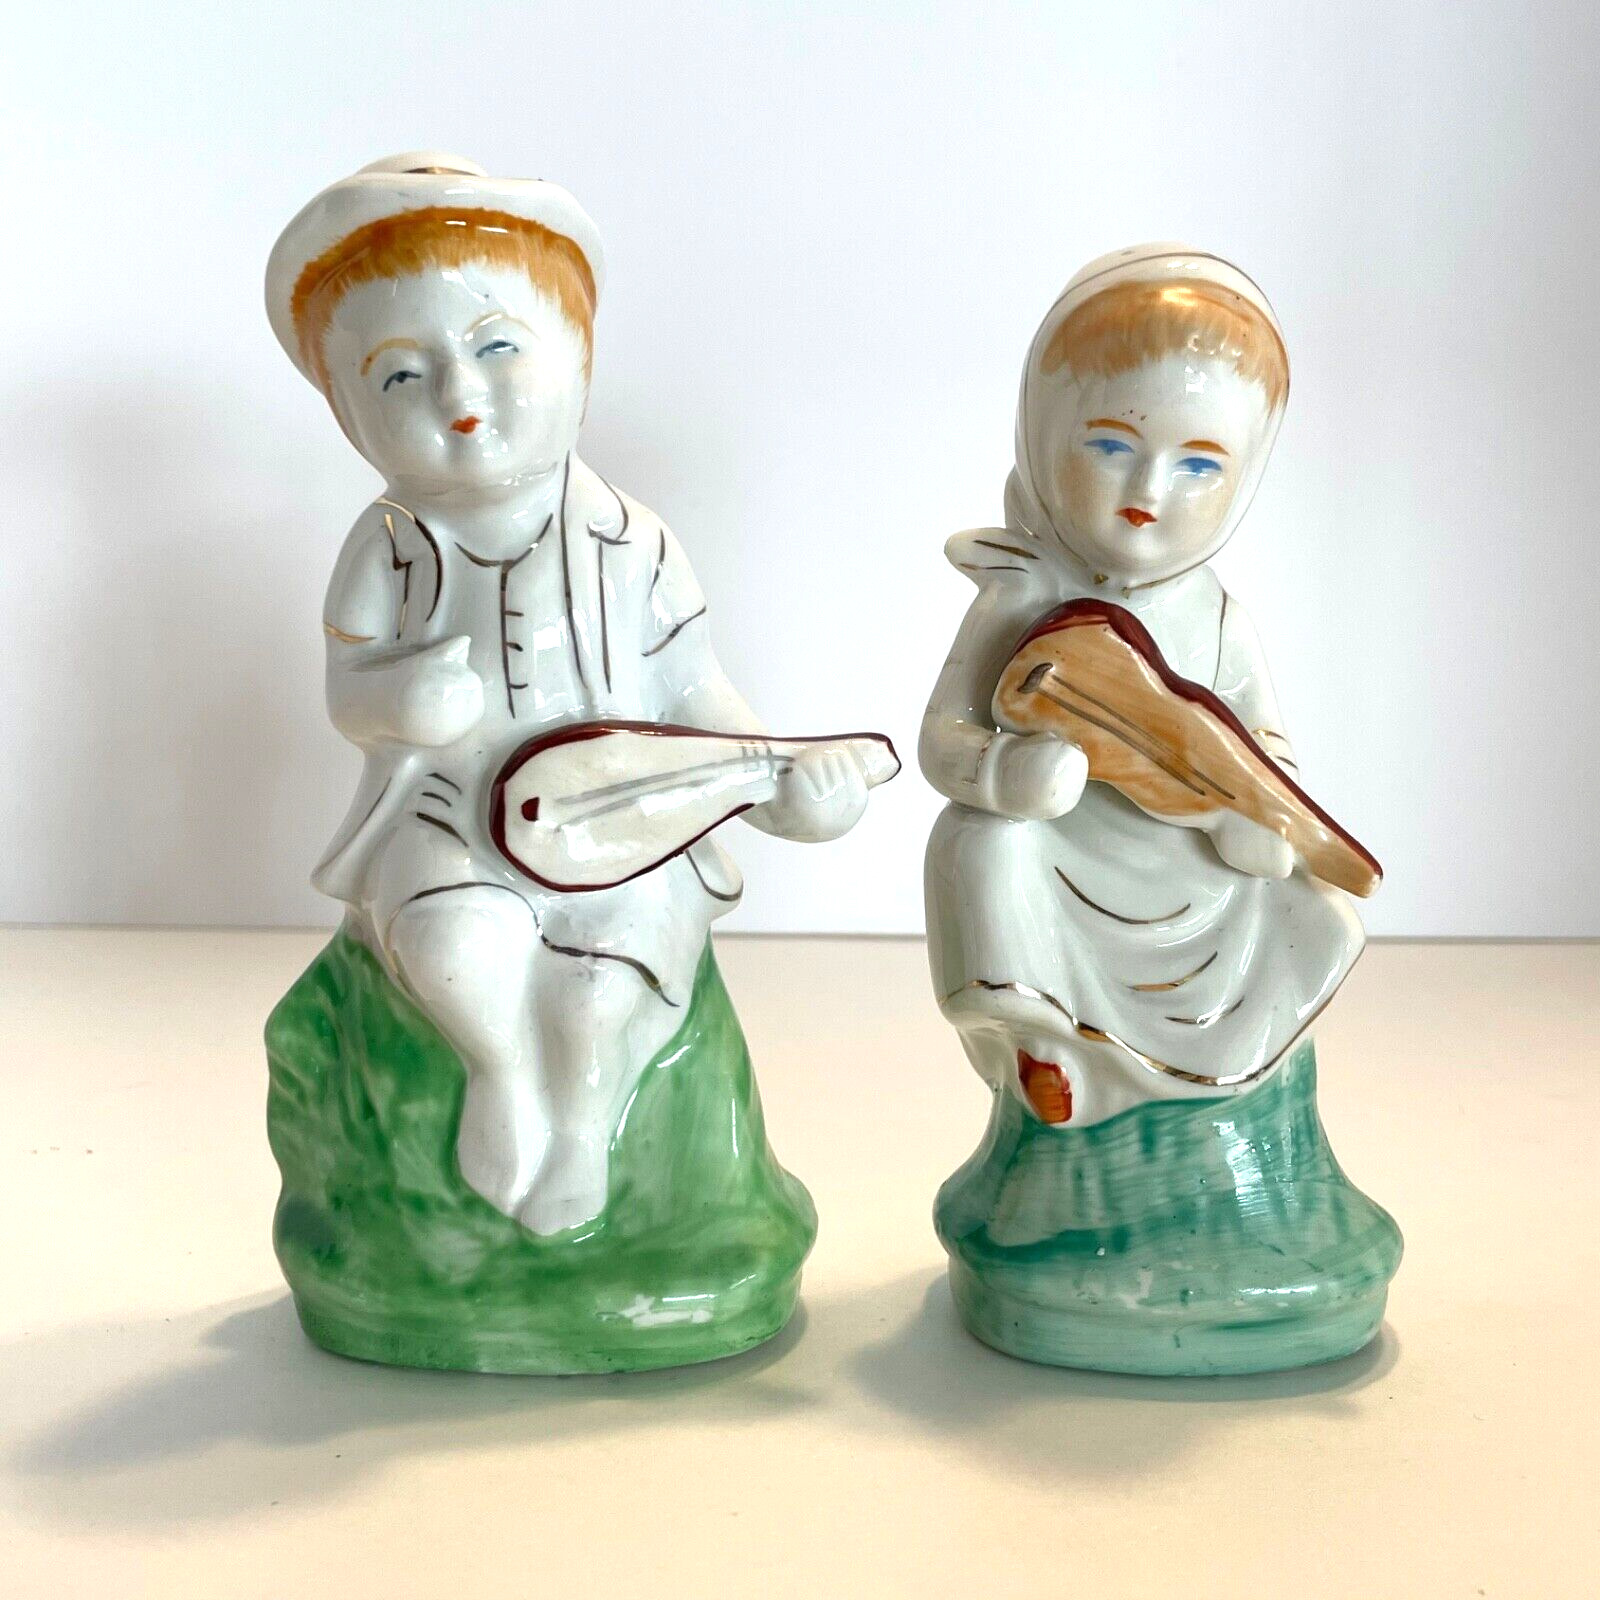 Set of 2 Vintage Porcelain Figurines Boy and Girl Playing Instruments